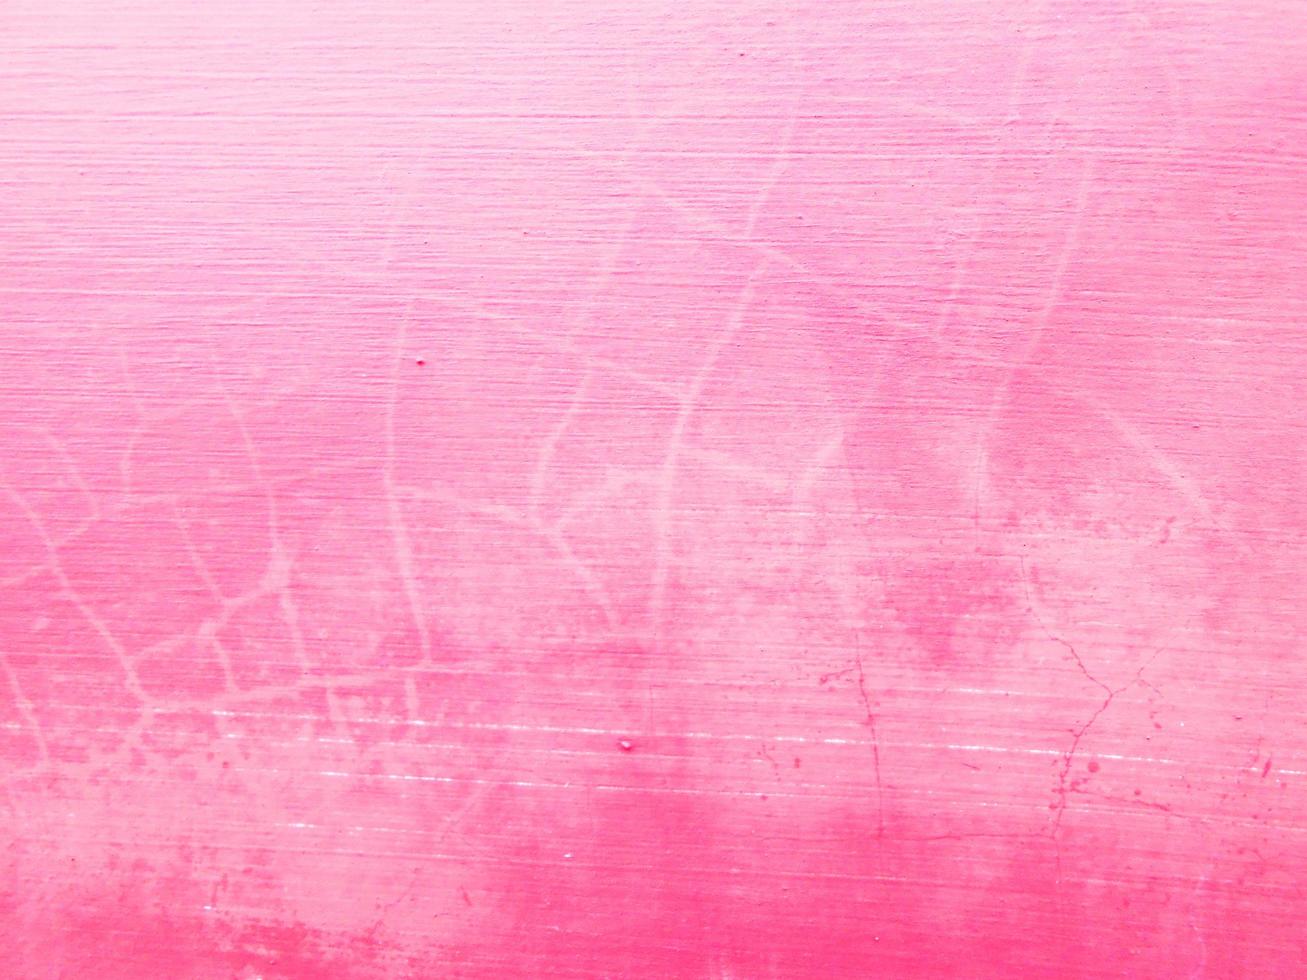 Cracked and Peeling Painted Pink Concrete Texture Background photo